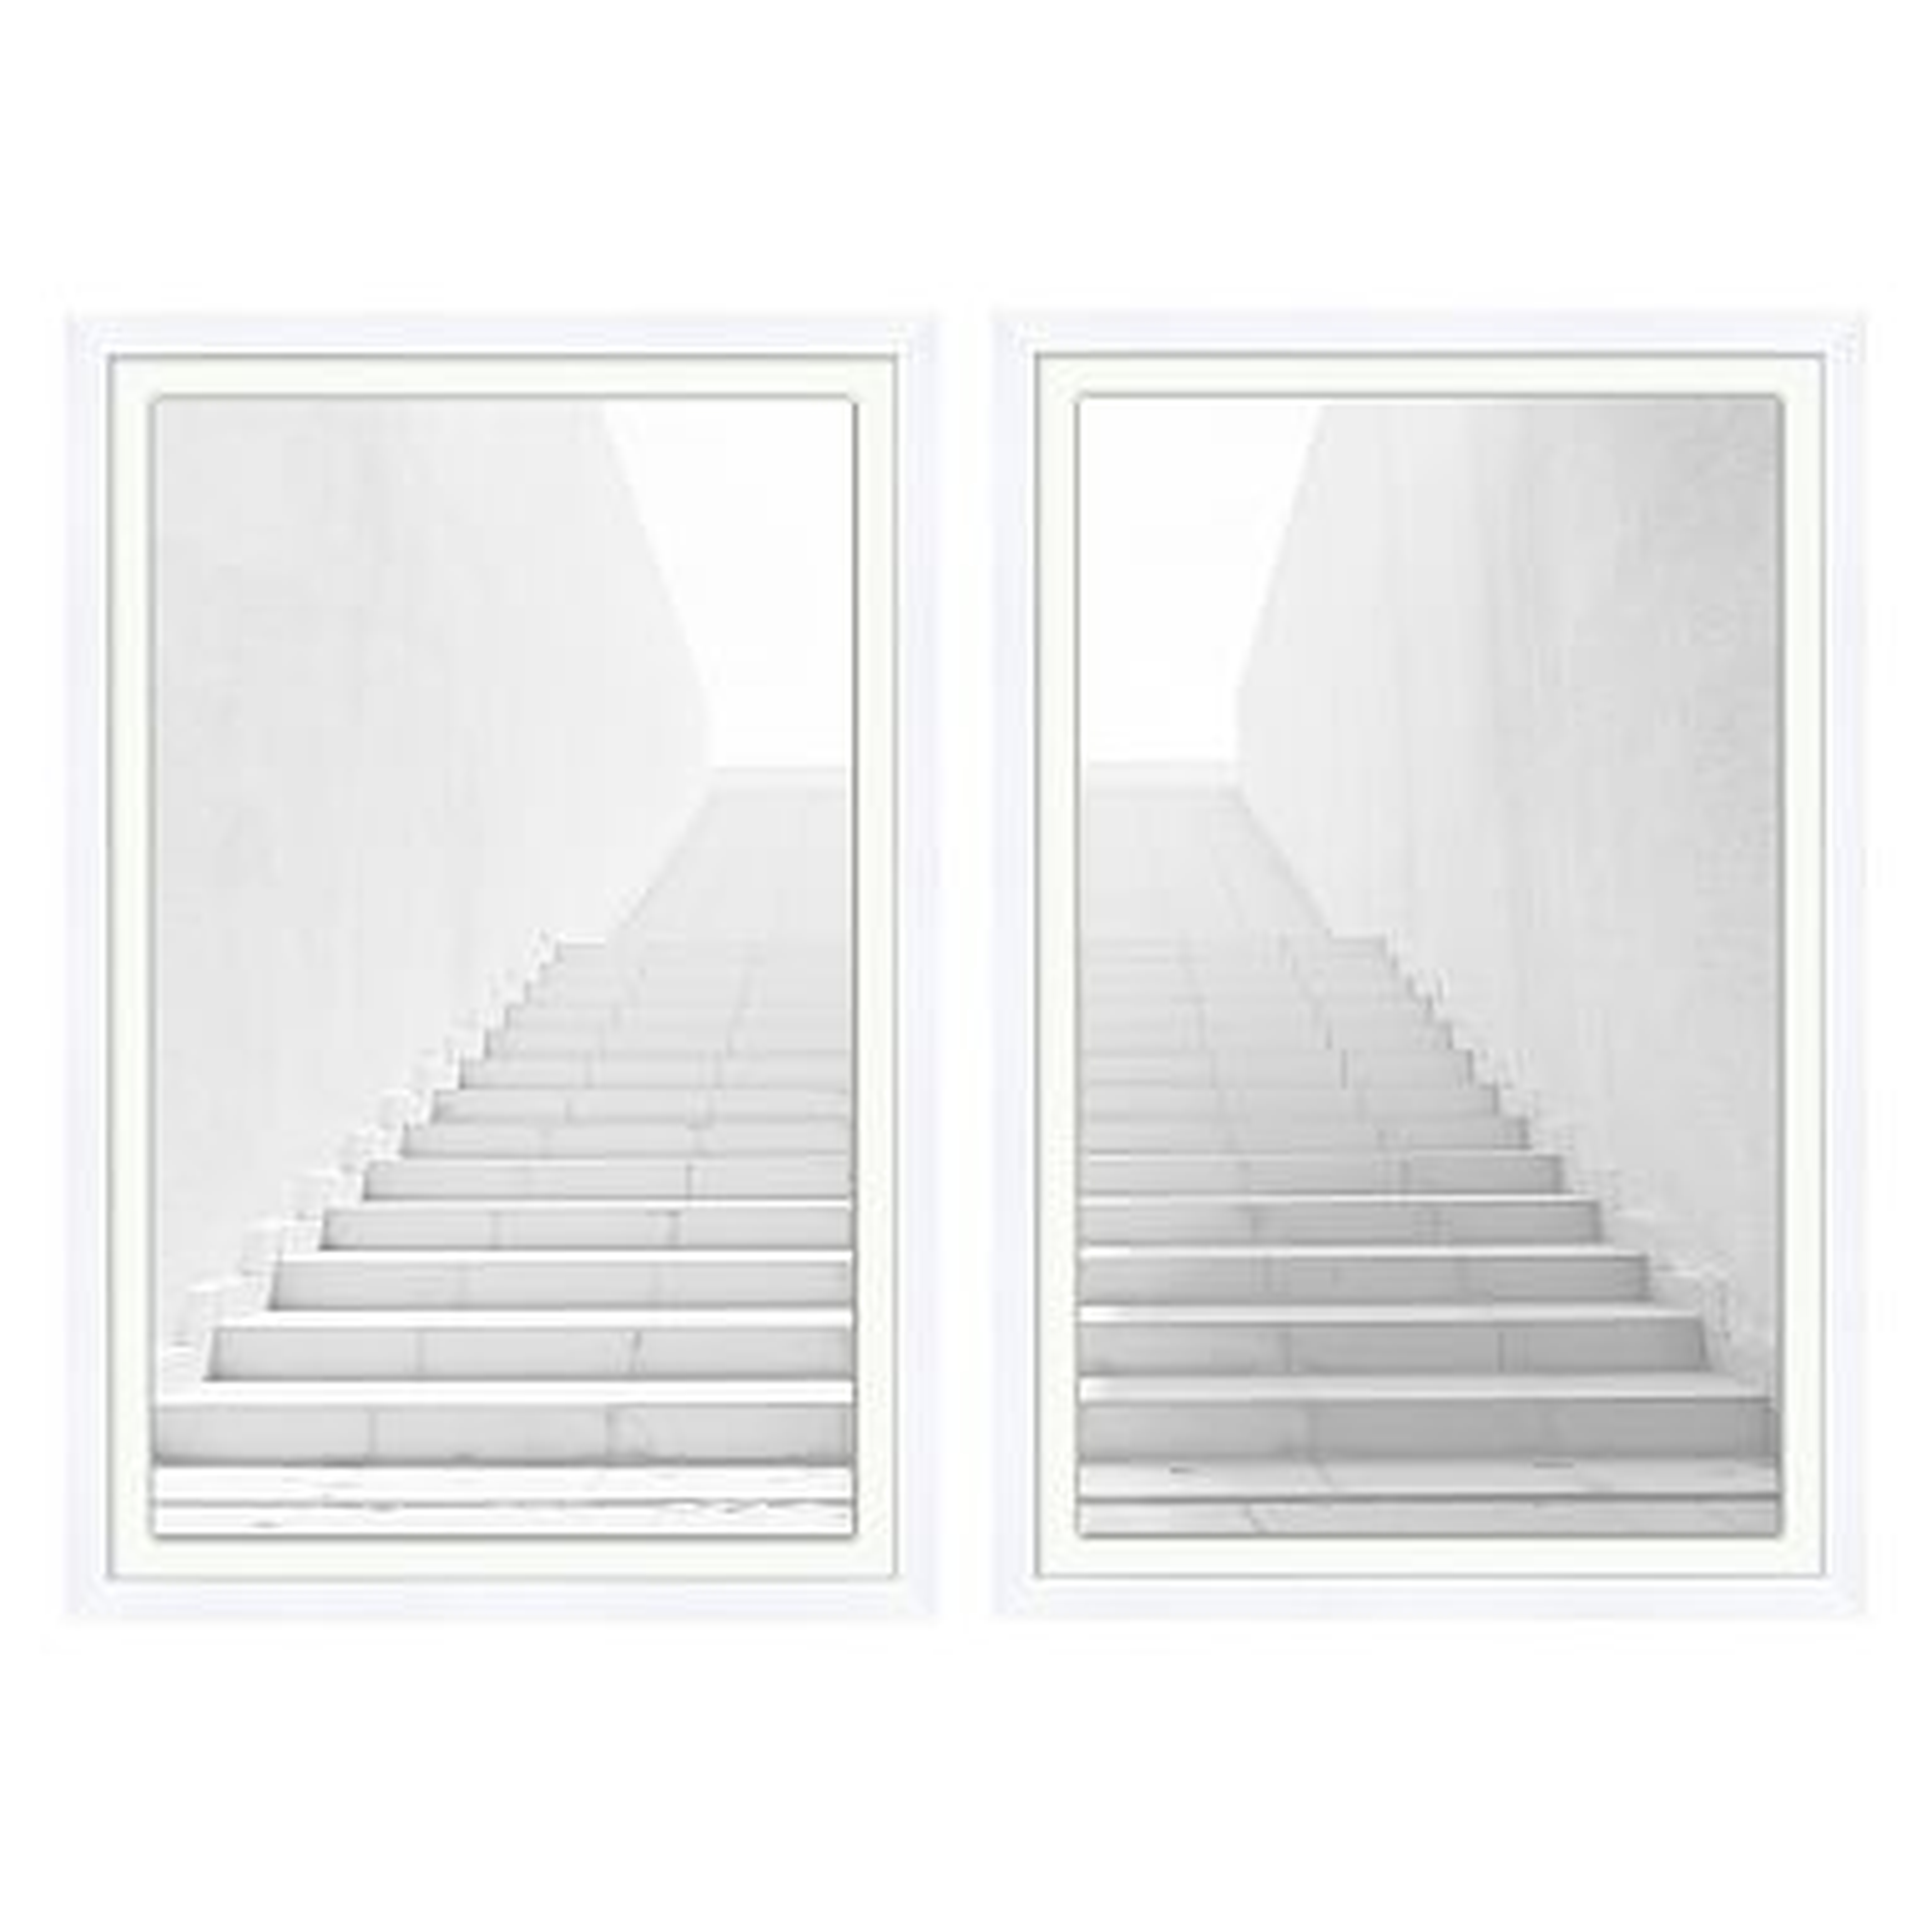 White Washed Stairs Diptych Framed Art, Set of 2, White Frame, 20x30" - Pottery Barn Teen